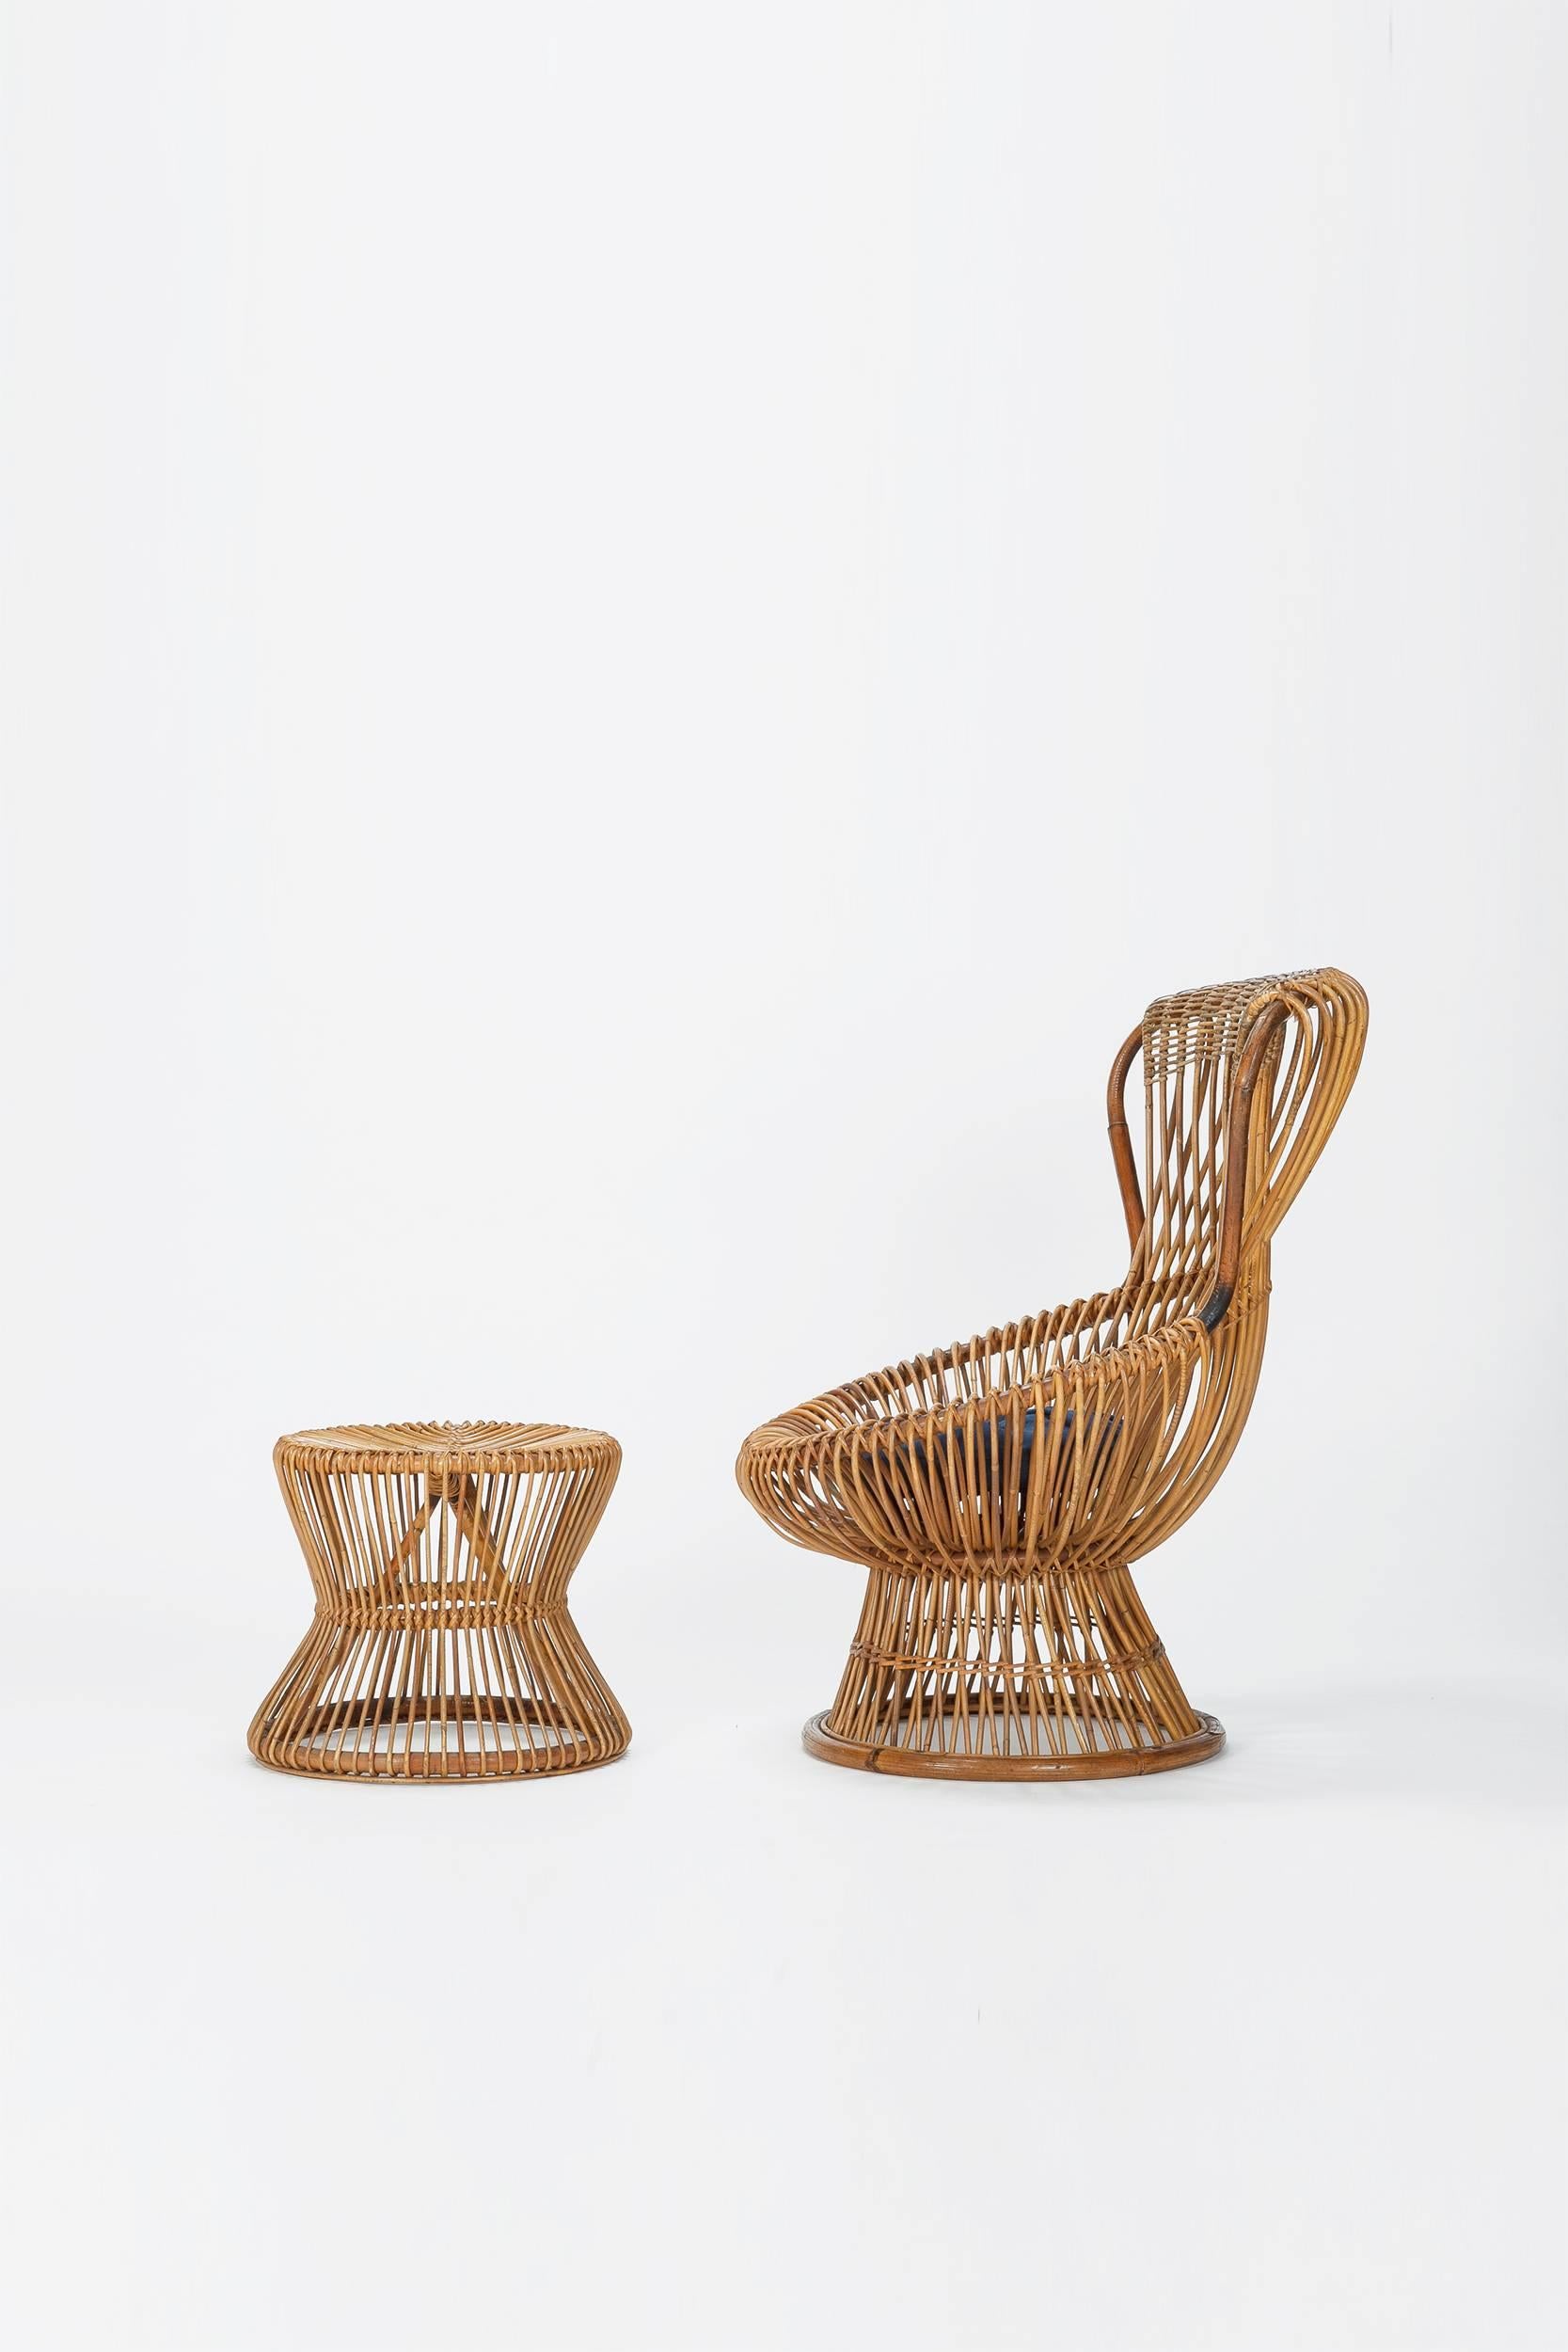 The Franco Albini Margherita chair was designed in Italy in the early 1950s for Bonacina and won the first prize at the 9th Milan Triennale in 1951. The model here was manufactured in the 1950s and has a rare matching side table or stool. The seat